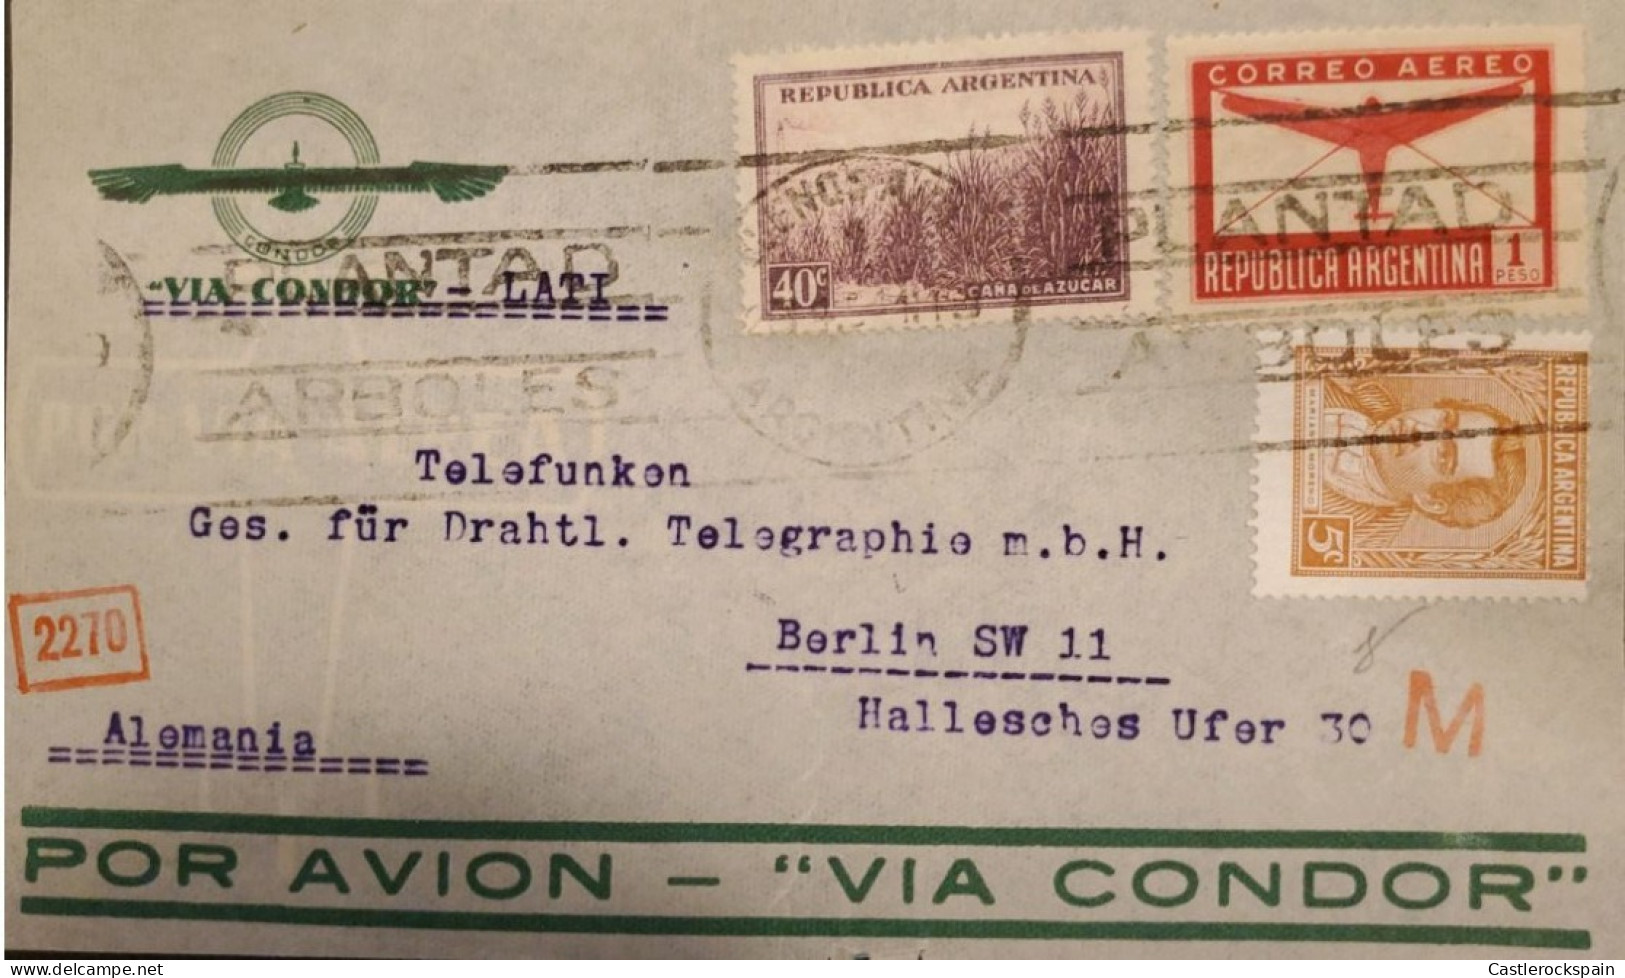 MI) 1936-42, ARGENTINA, AIR MAIL, VIA CONDOR, FROM BUENOS AIRES TO GERMANY, WITH CANCELLATION SLOGAN, MARIANO MORENO STA - Usati